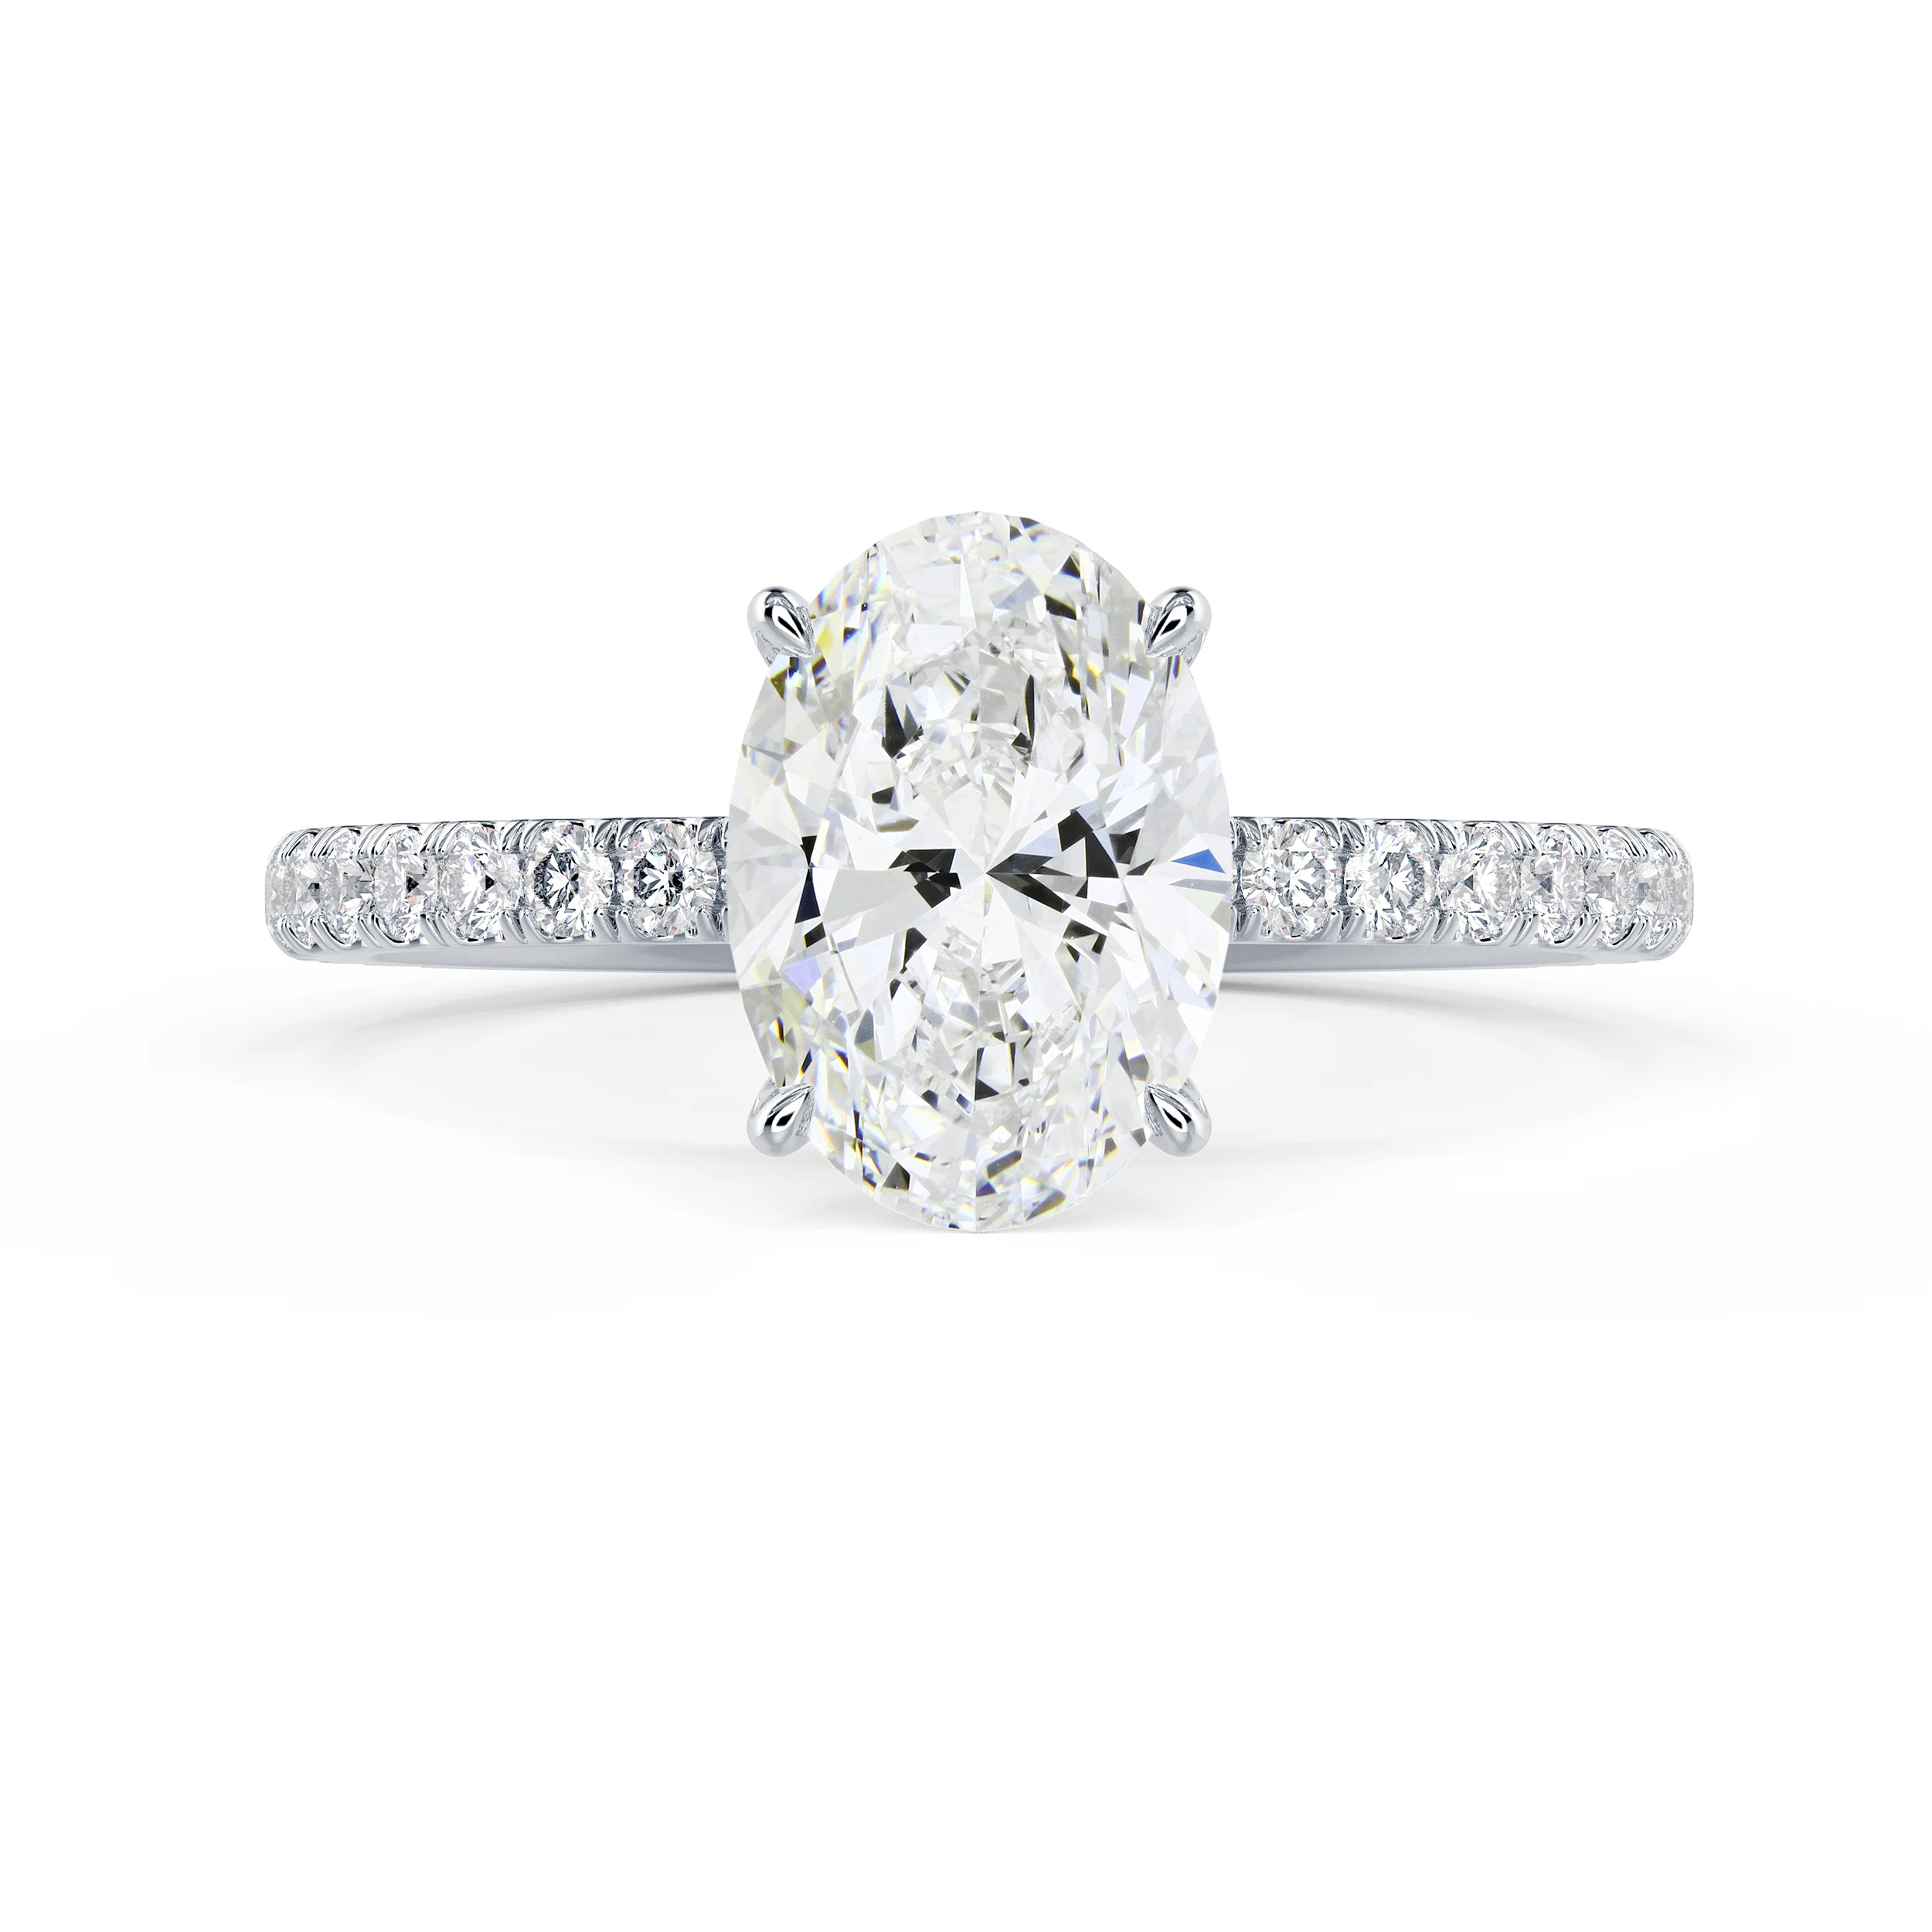 Hand Selected Lab Diamonds set in White Gold Oval Classic Four Prong Pavé Setting (Main View)